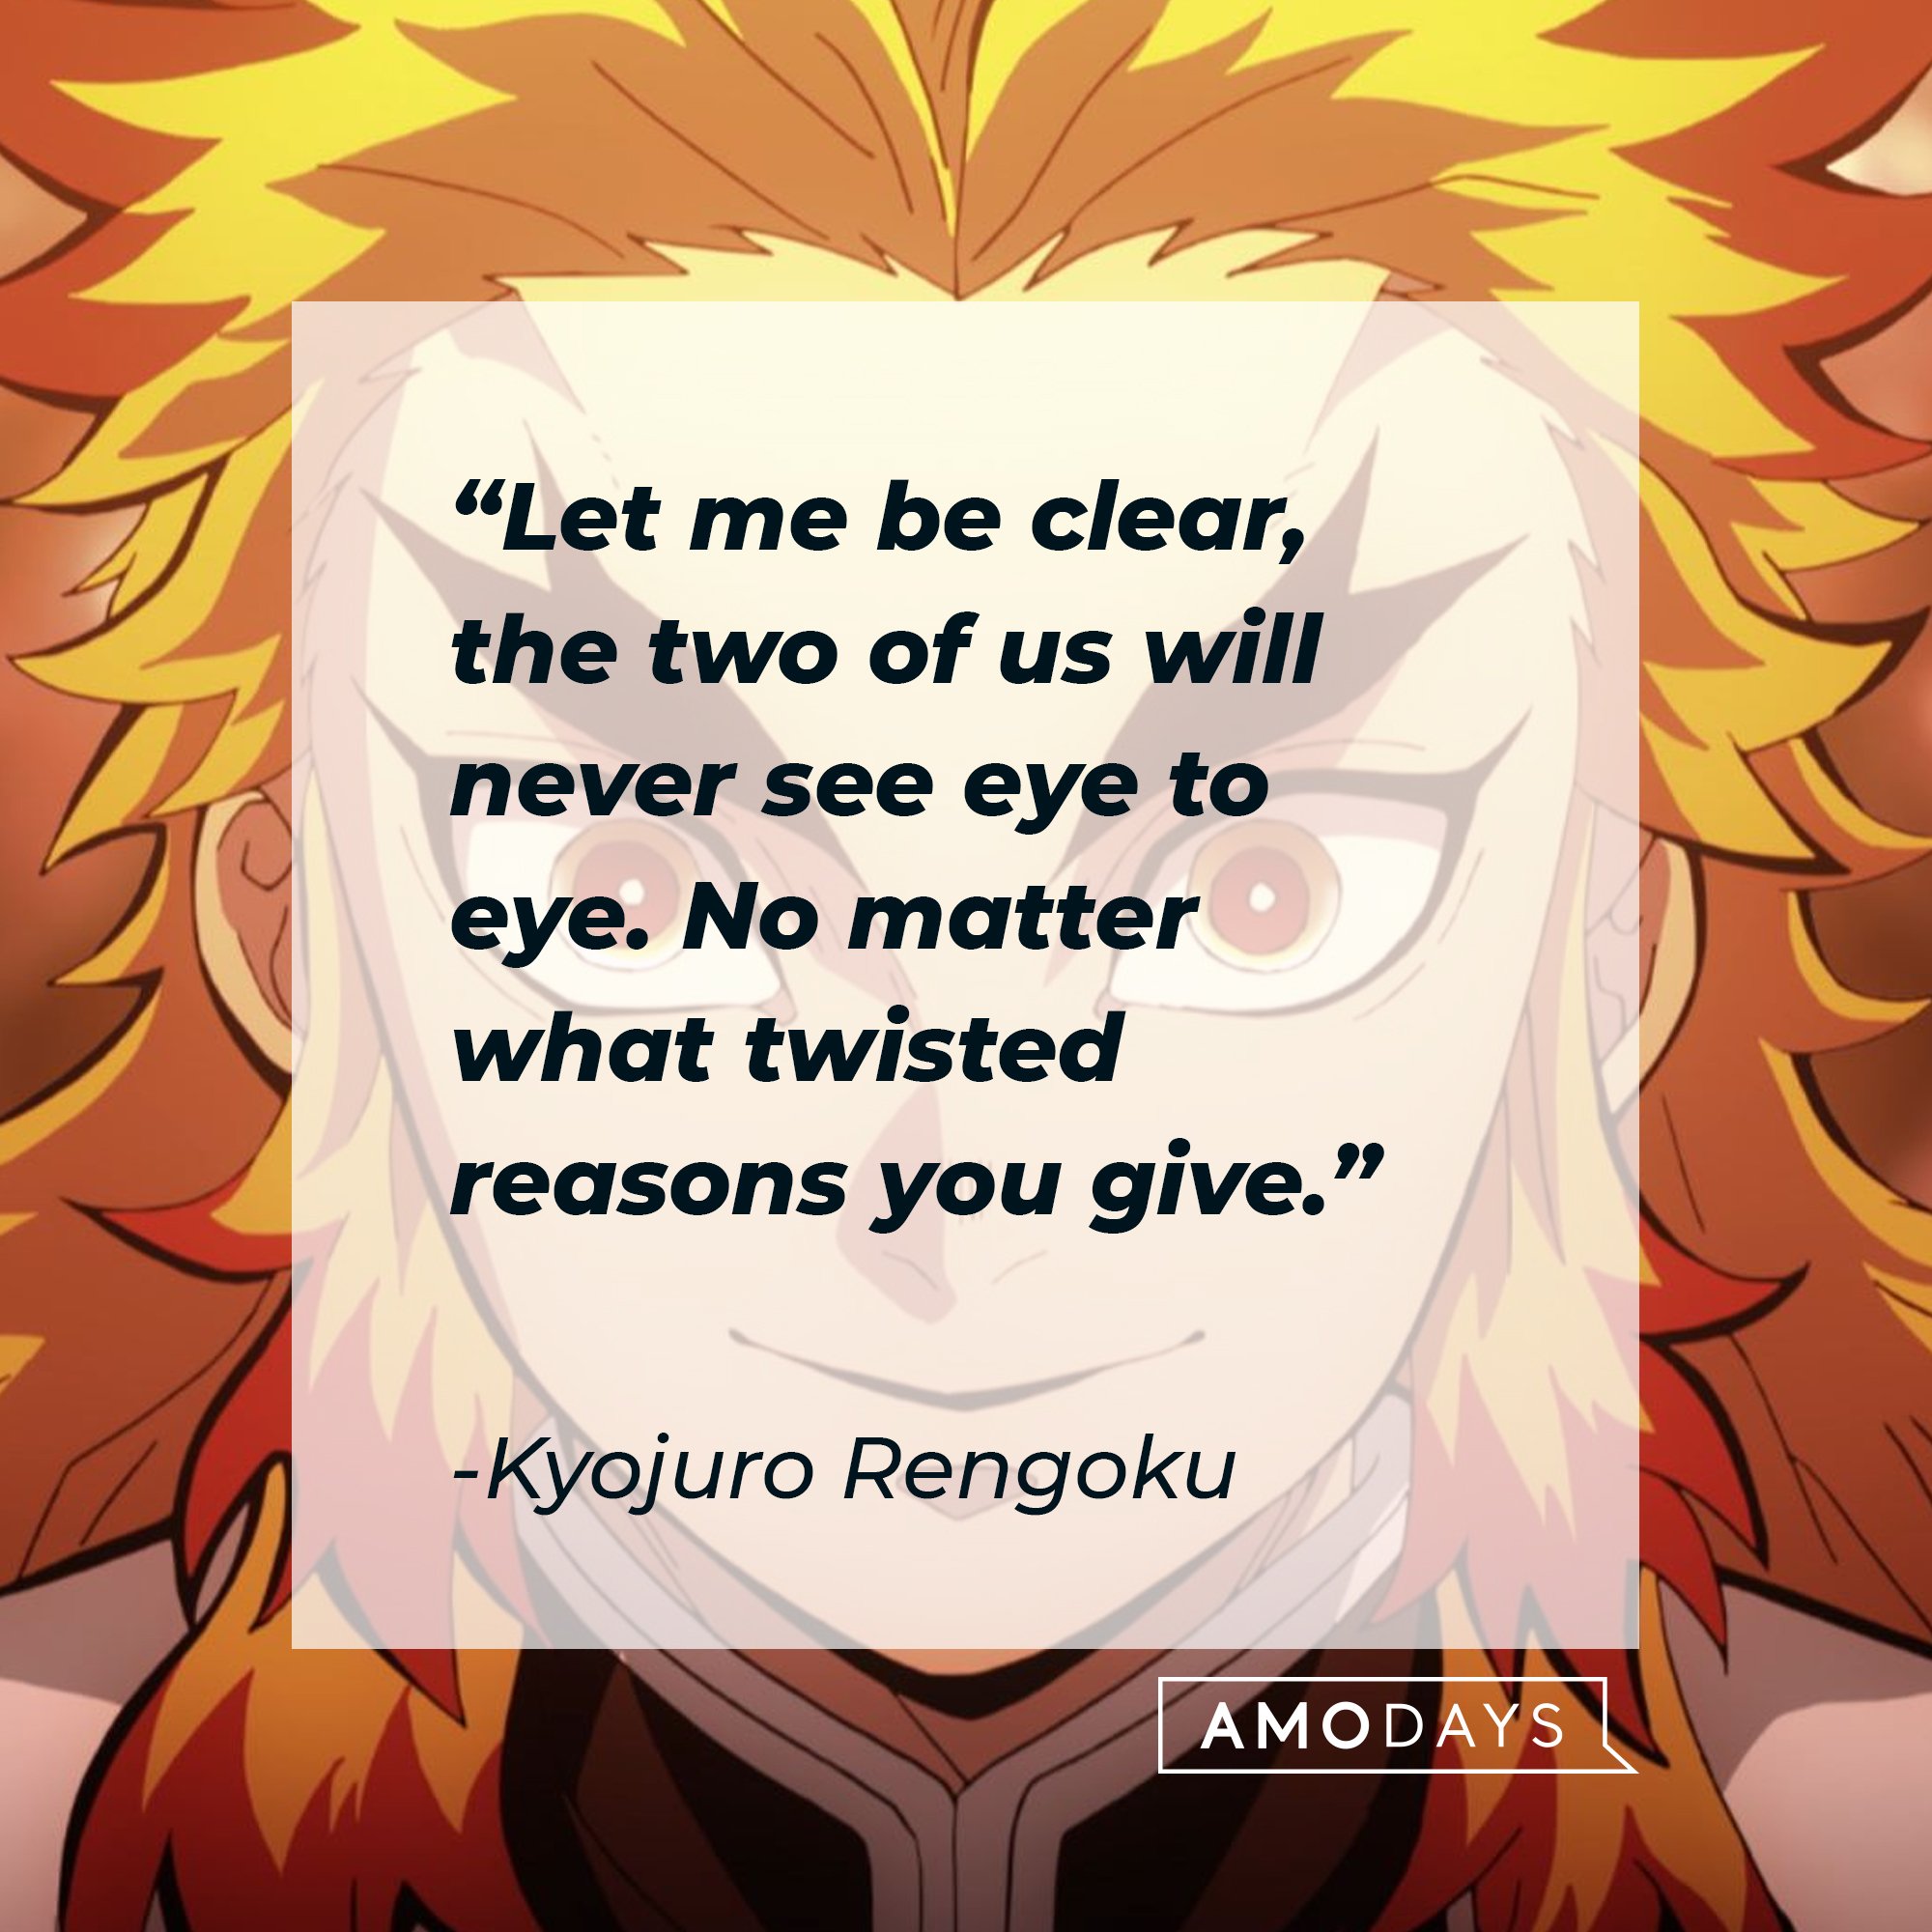 Kyojuro Rengoku’s quote: "Let me make this clear; your opponent stands before you now." | Image: AmoDays